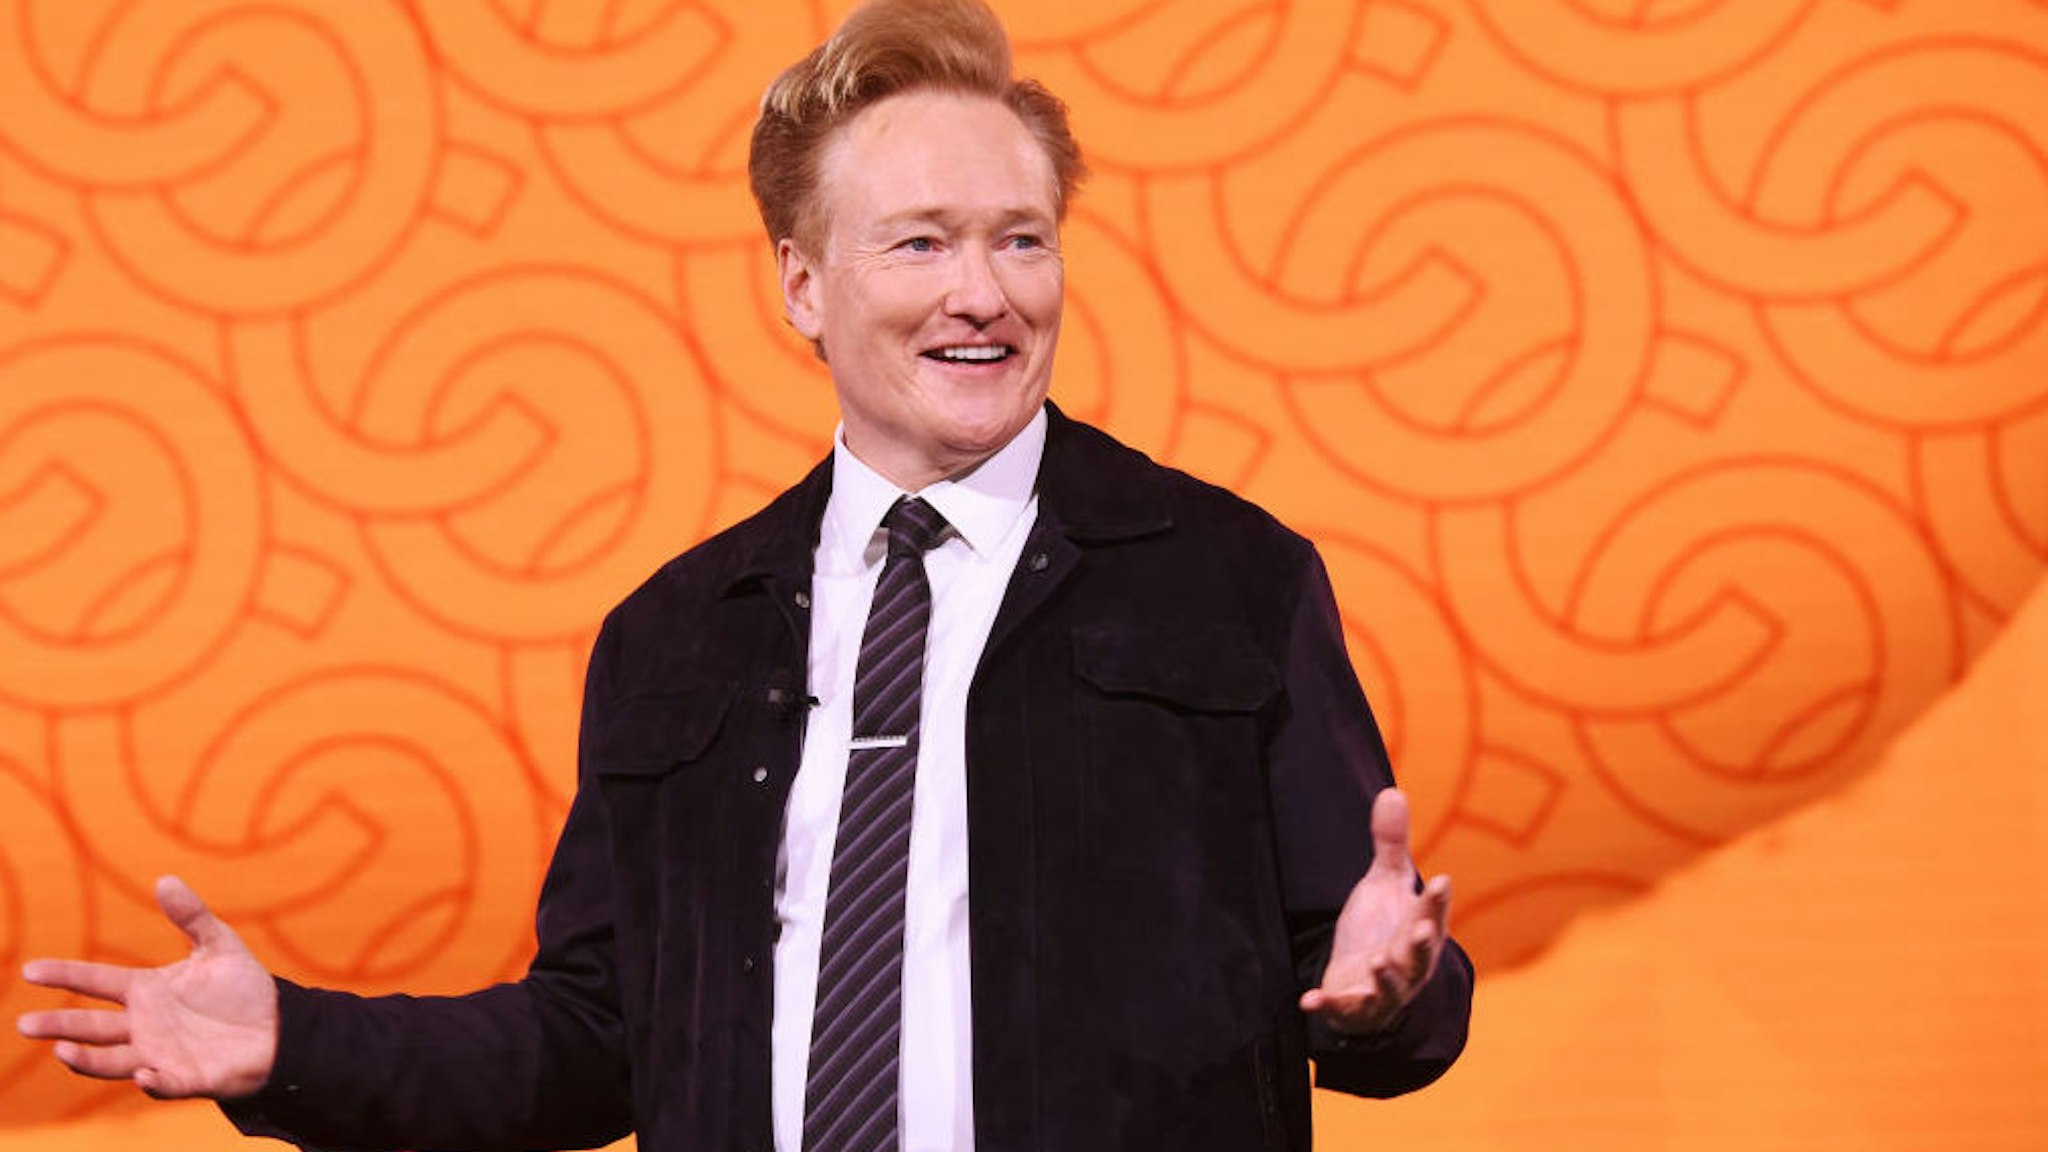 Conan O'Brien of TBS’s CONAN speaks onstage during the WarnerMedia Upfront 2019 show at The Theater at Madison Square Garden on May 15, 2019 in New York City.